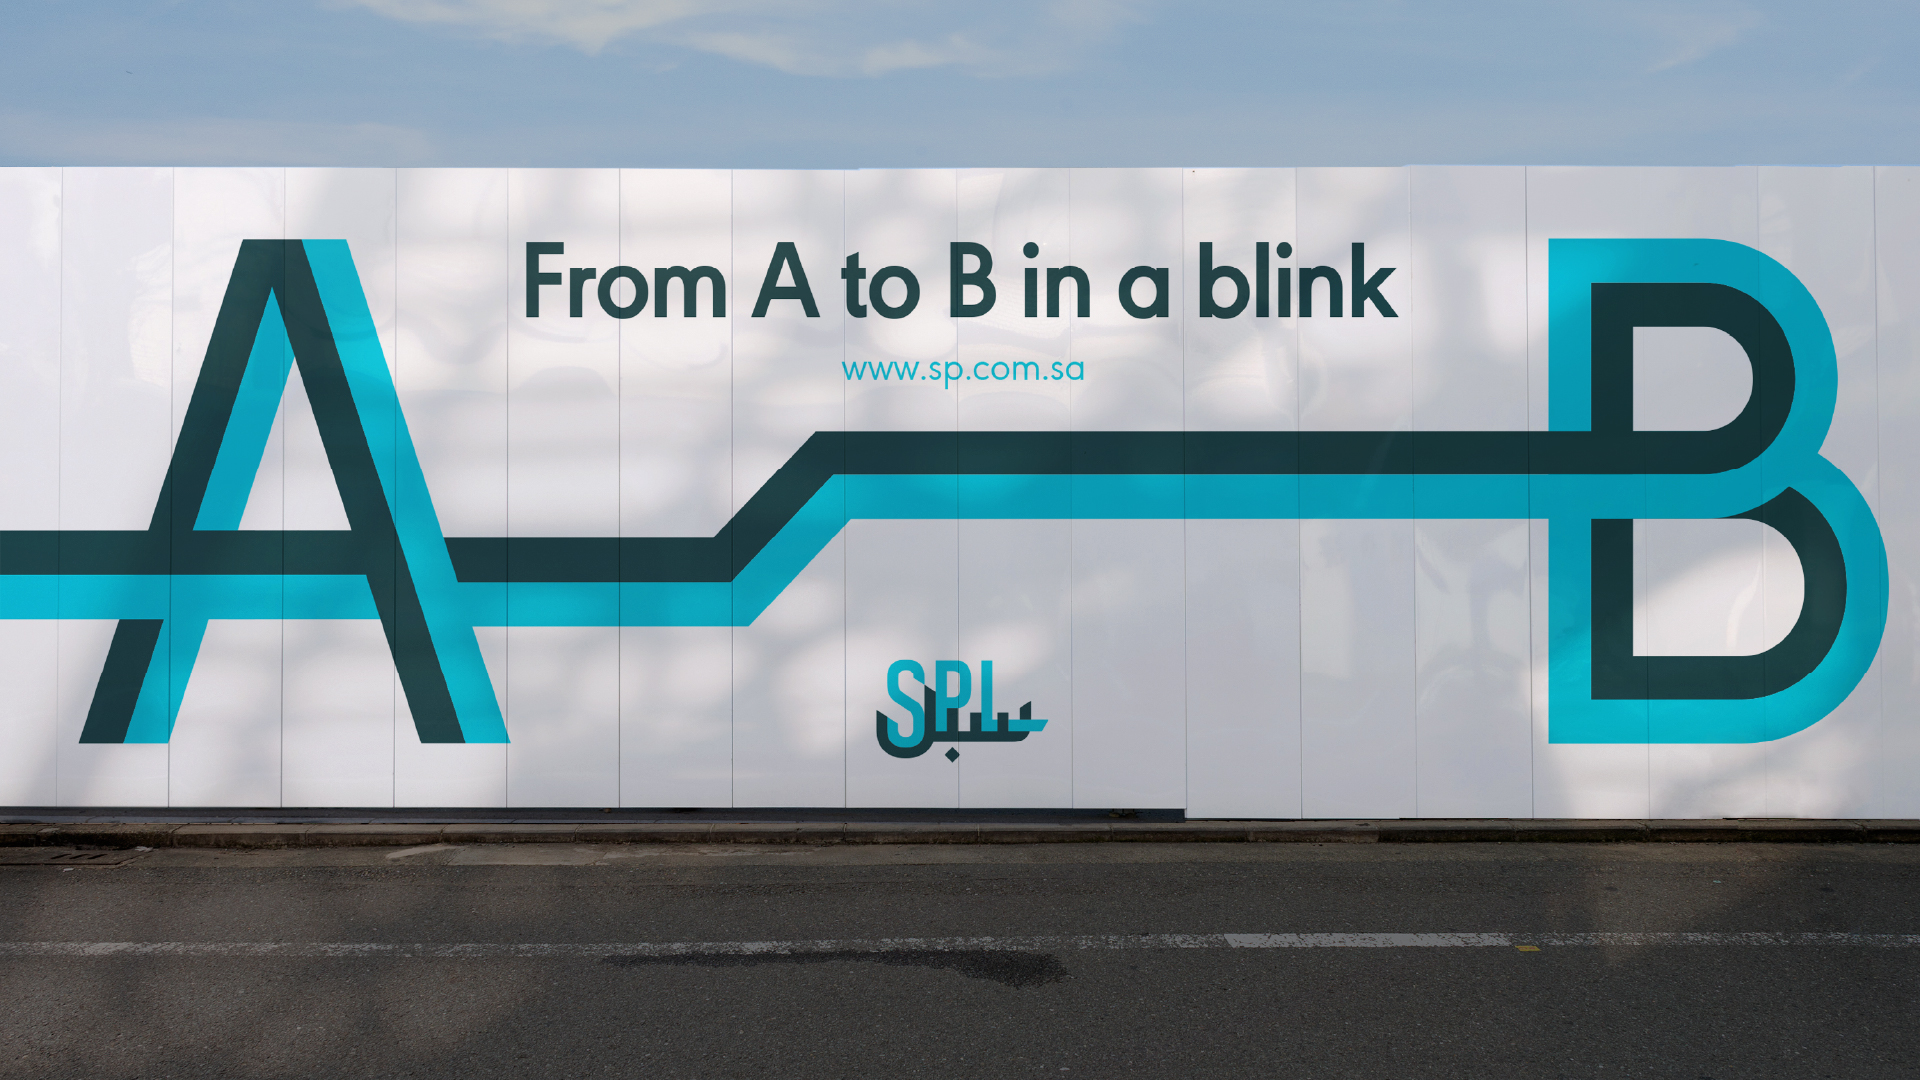 SPL advertisement. From A to B in a blink